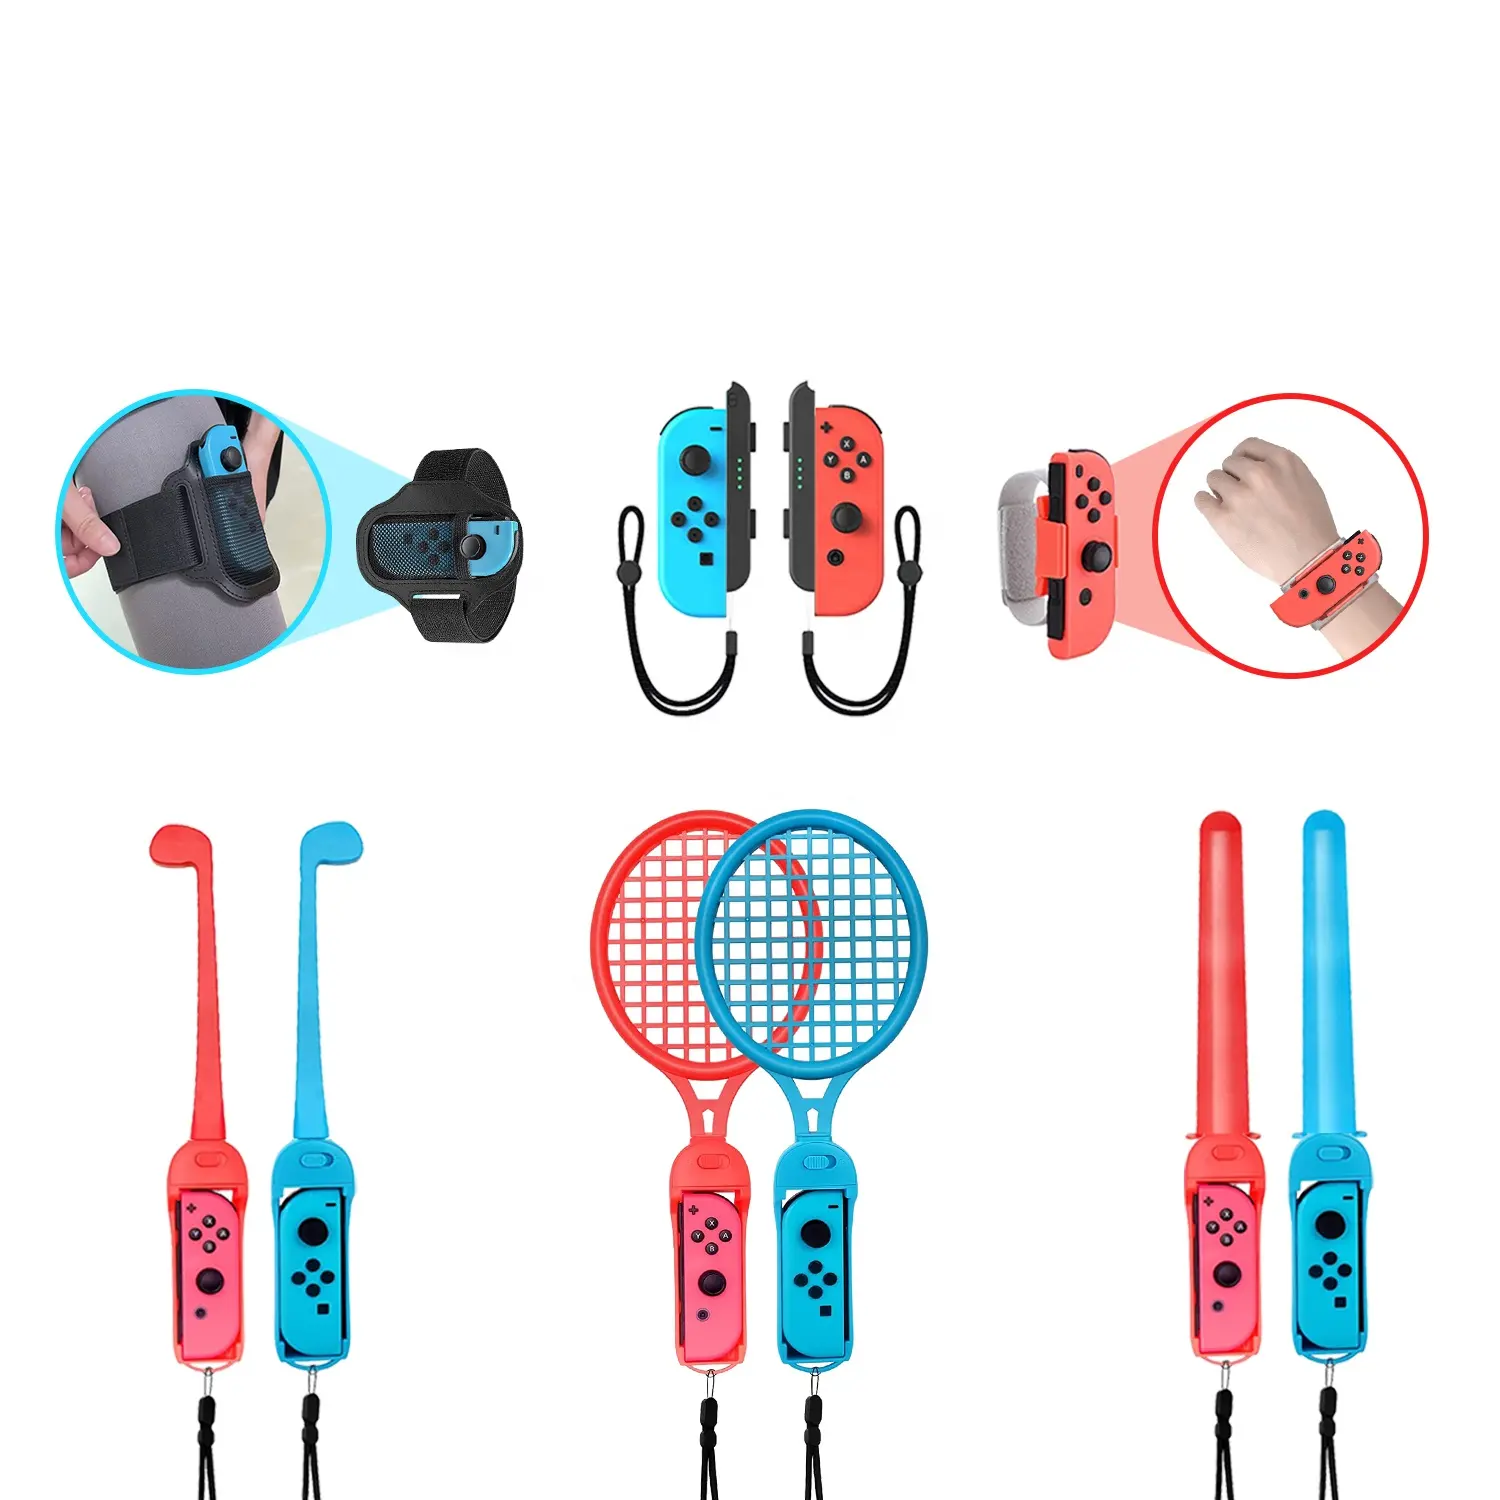 10 in 1 sports kit accessories bundle for nintendo switch sports games Golf Club tennis racket joy controllers grips